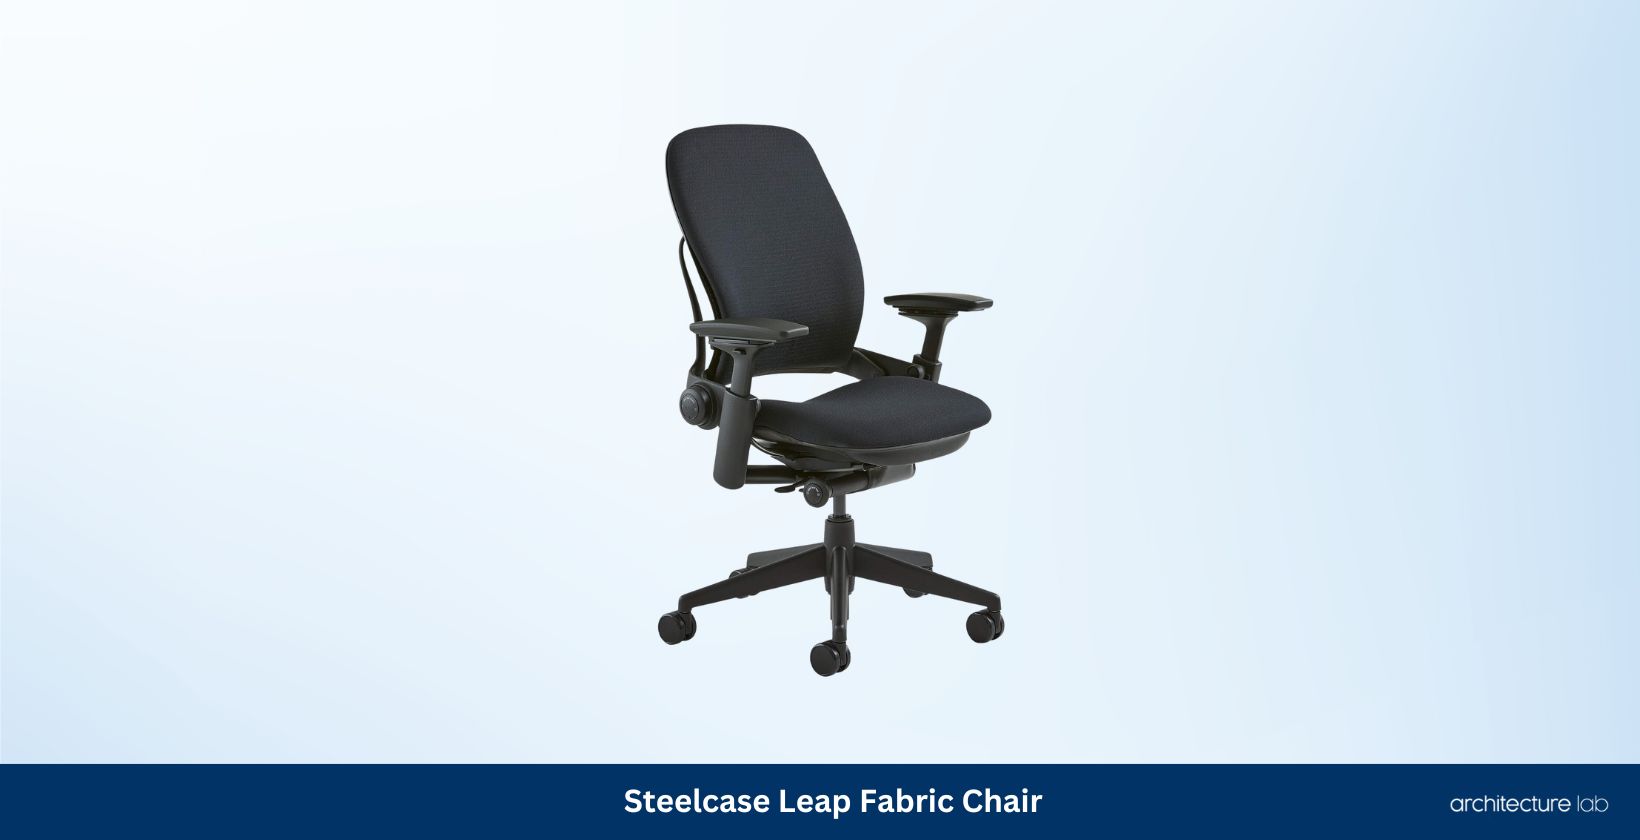 Steelcase leap fabric chair